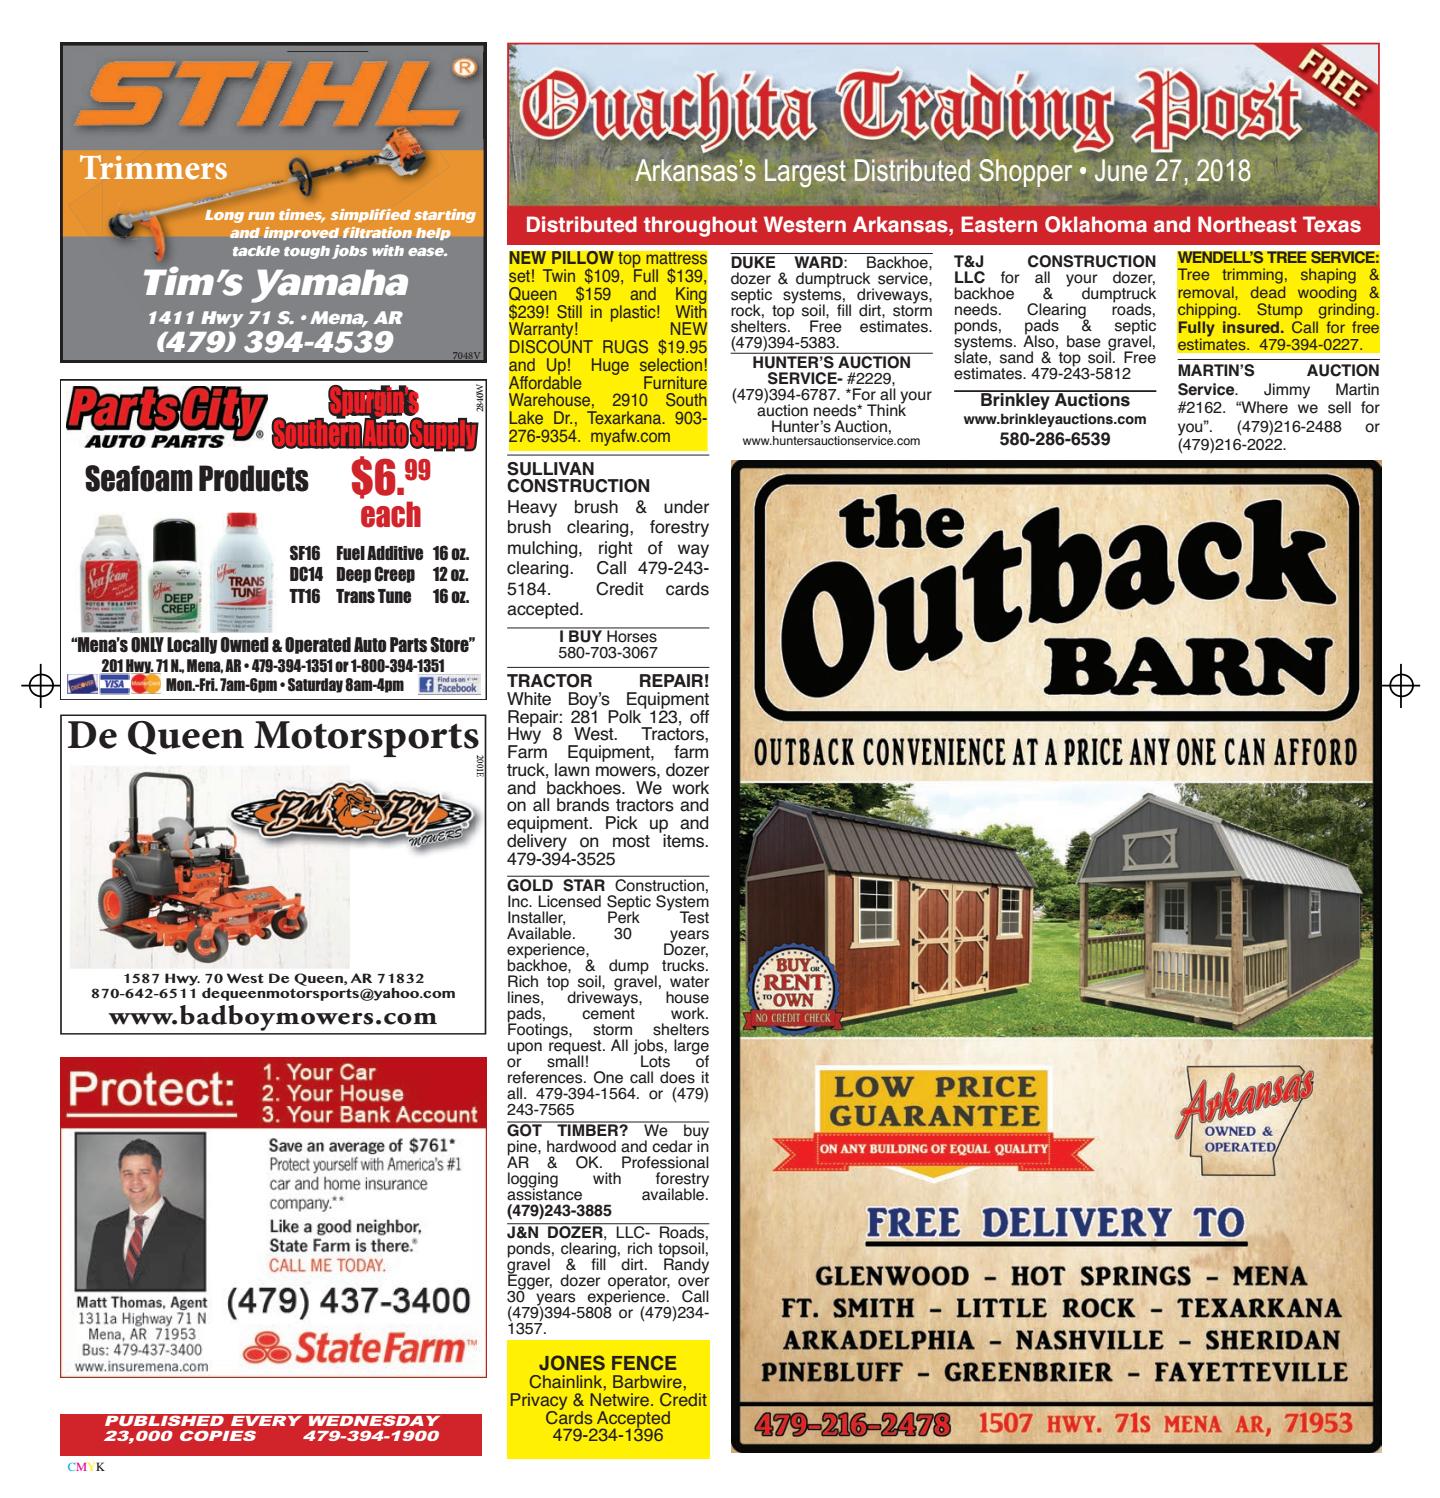 Central Arkansas Fireplace Best Of Ouachita Trading Post June 27 2018 by Mena Newspapers